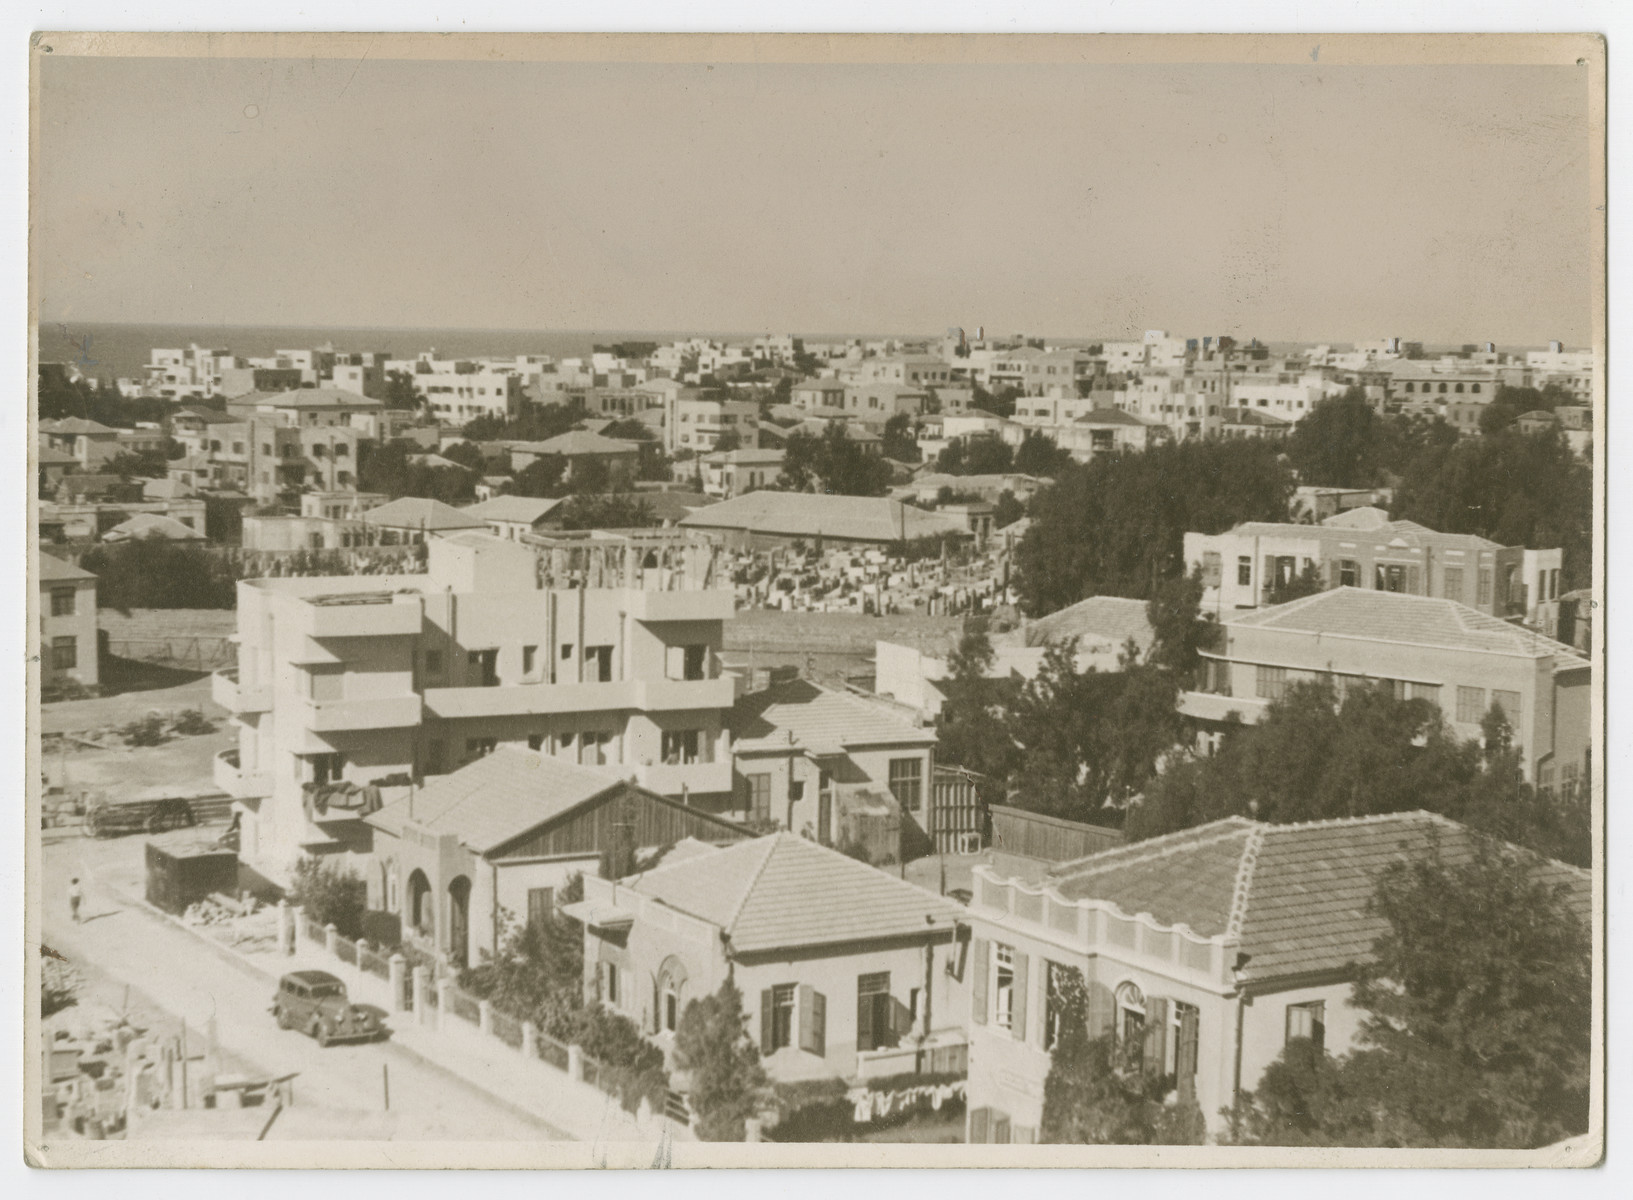 Panoramic view of Tel Aviv taken from the roof of City Hall.

Photograph is used on page 174 of Robert Gessner's "Some of My Best Friends are Jews."